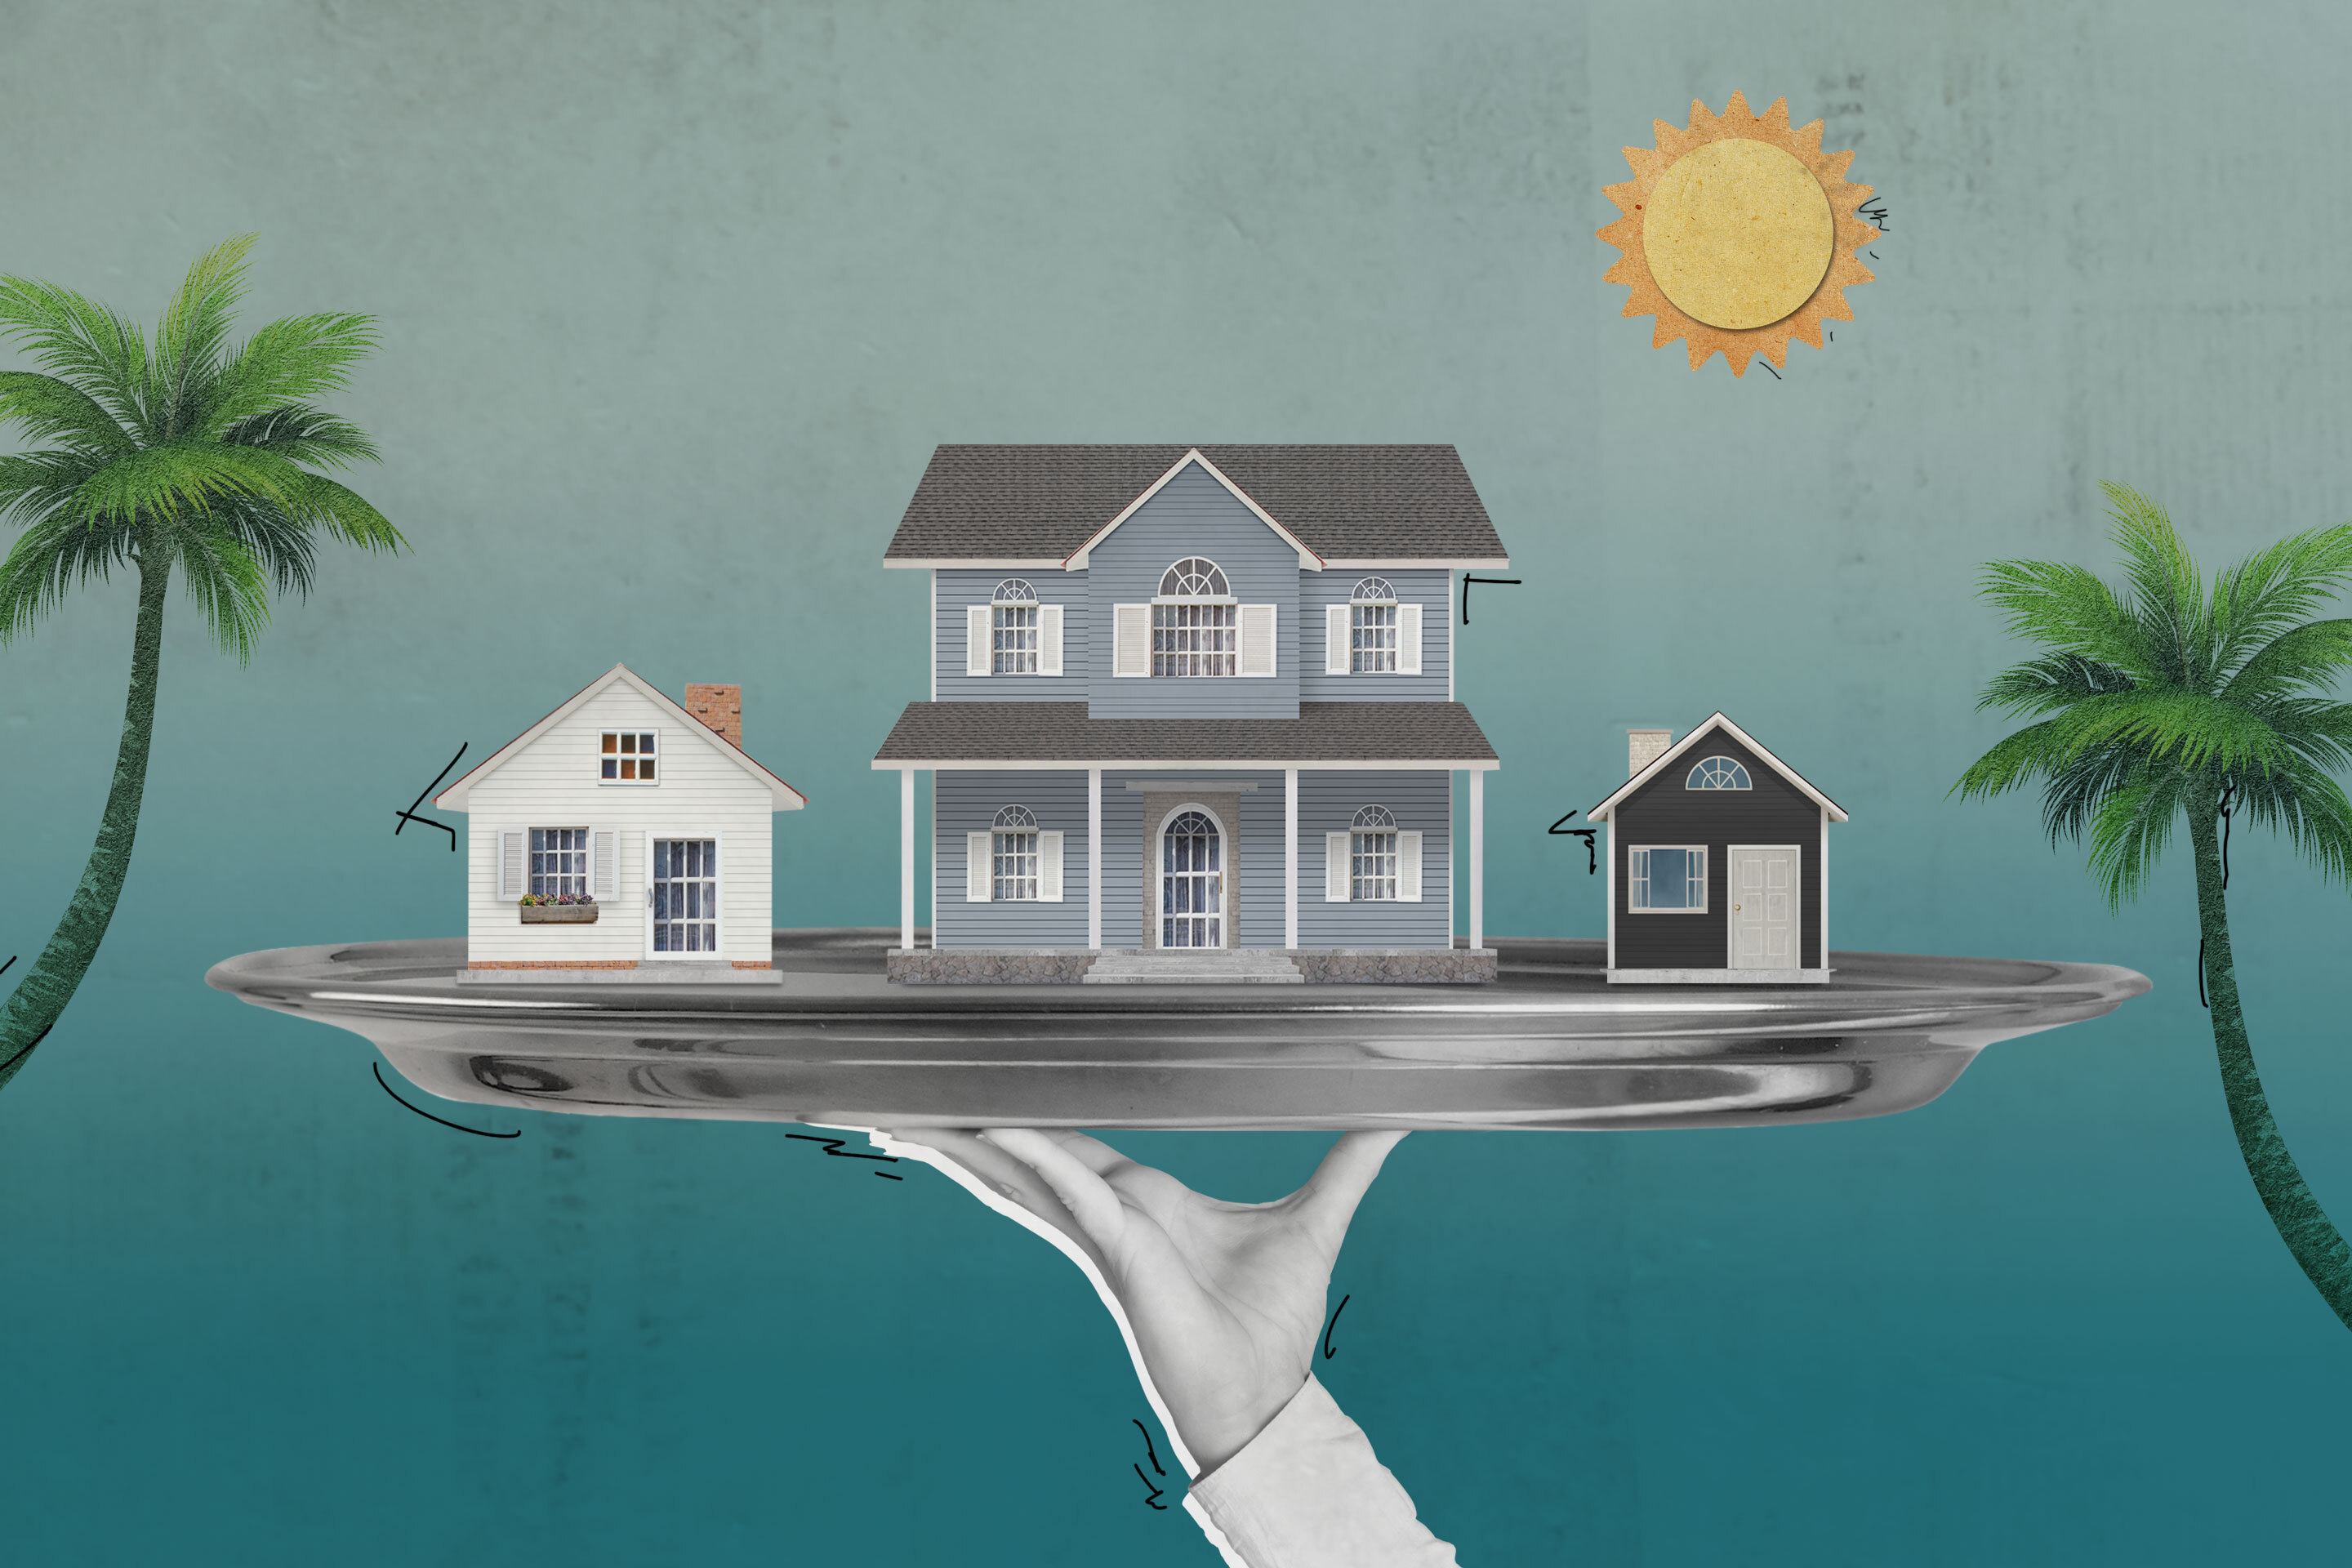 The Housing Market Shows No Signs of Cooling. 5 Tips For Buying This Summer Anyway